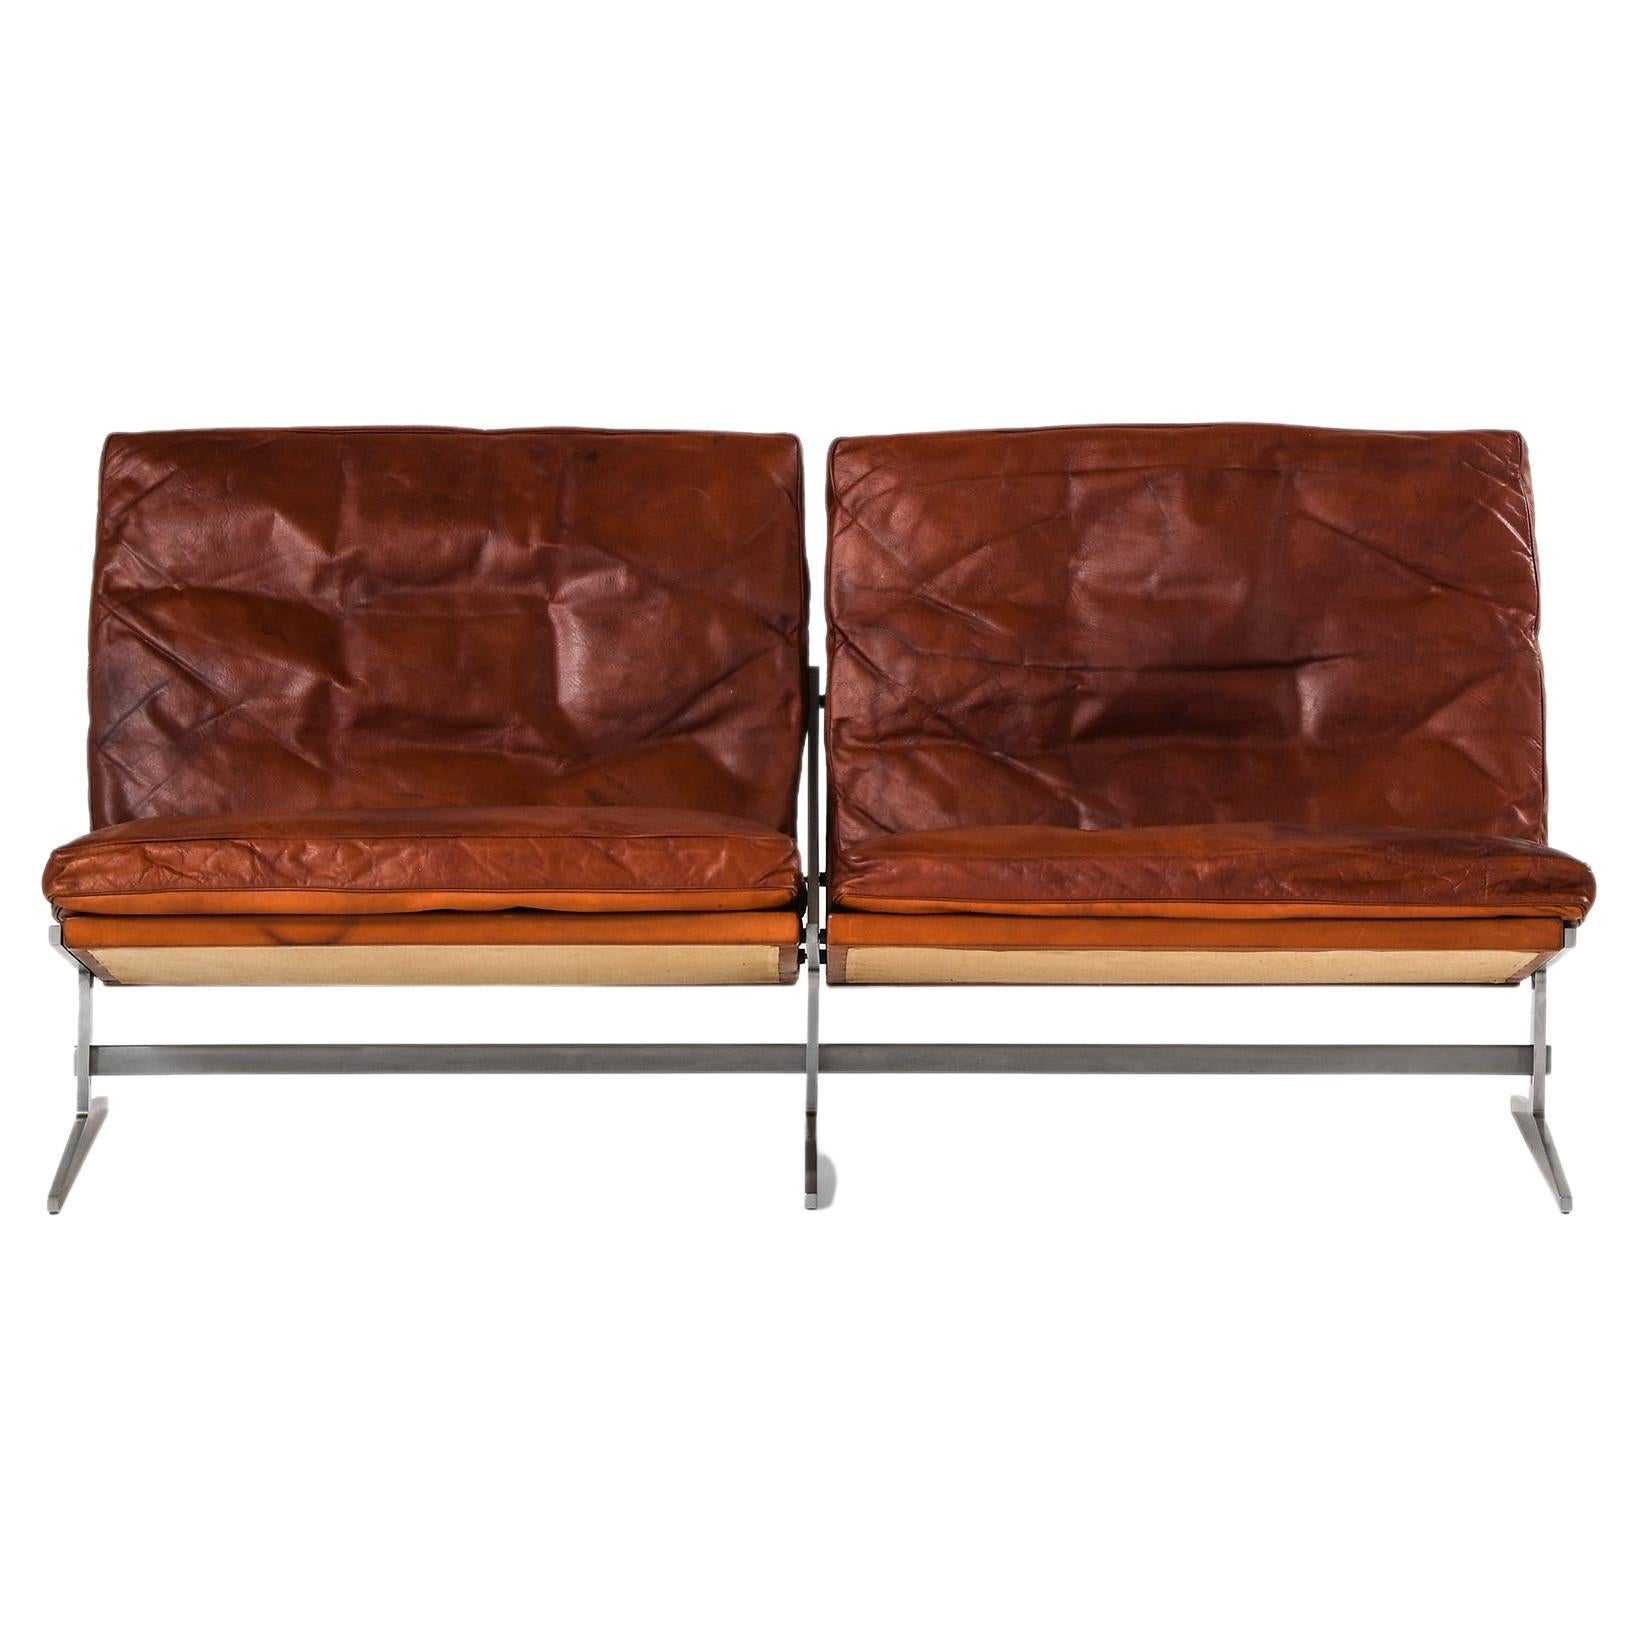 Two Seater Sofa in Steel & Leather by Jørgen Kastholm & Preben Fabricius, 1960's For Sale